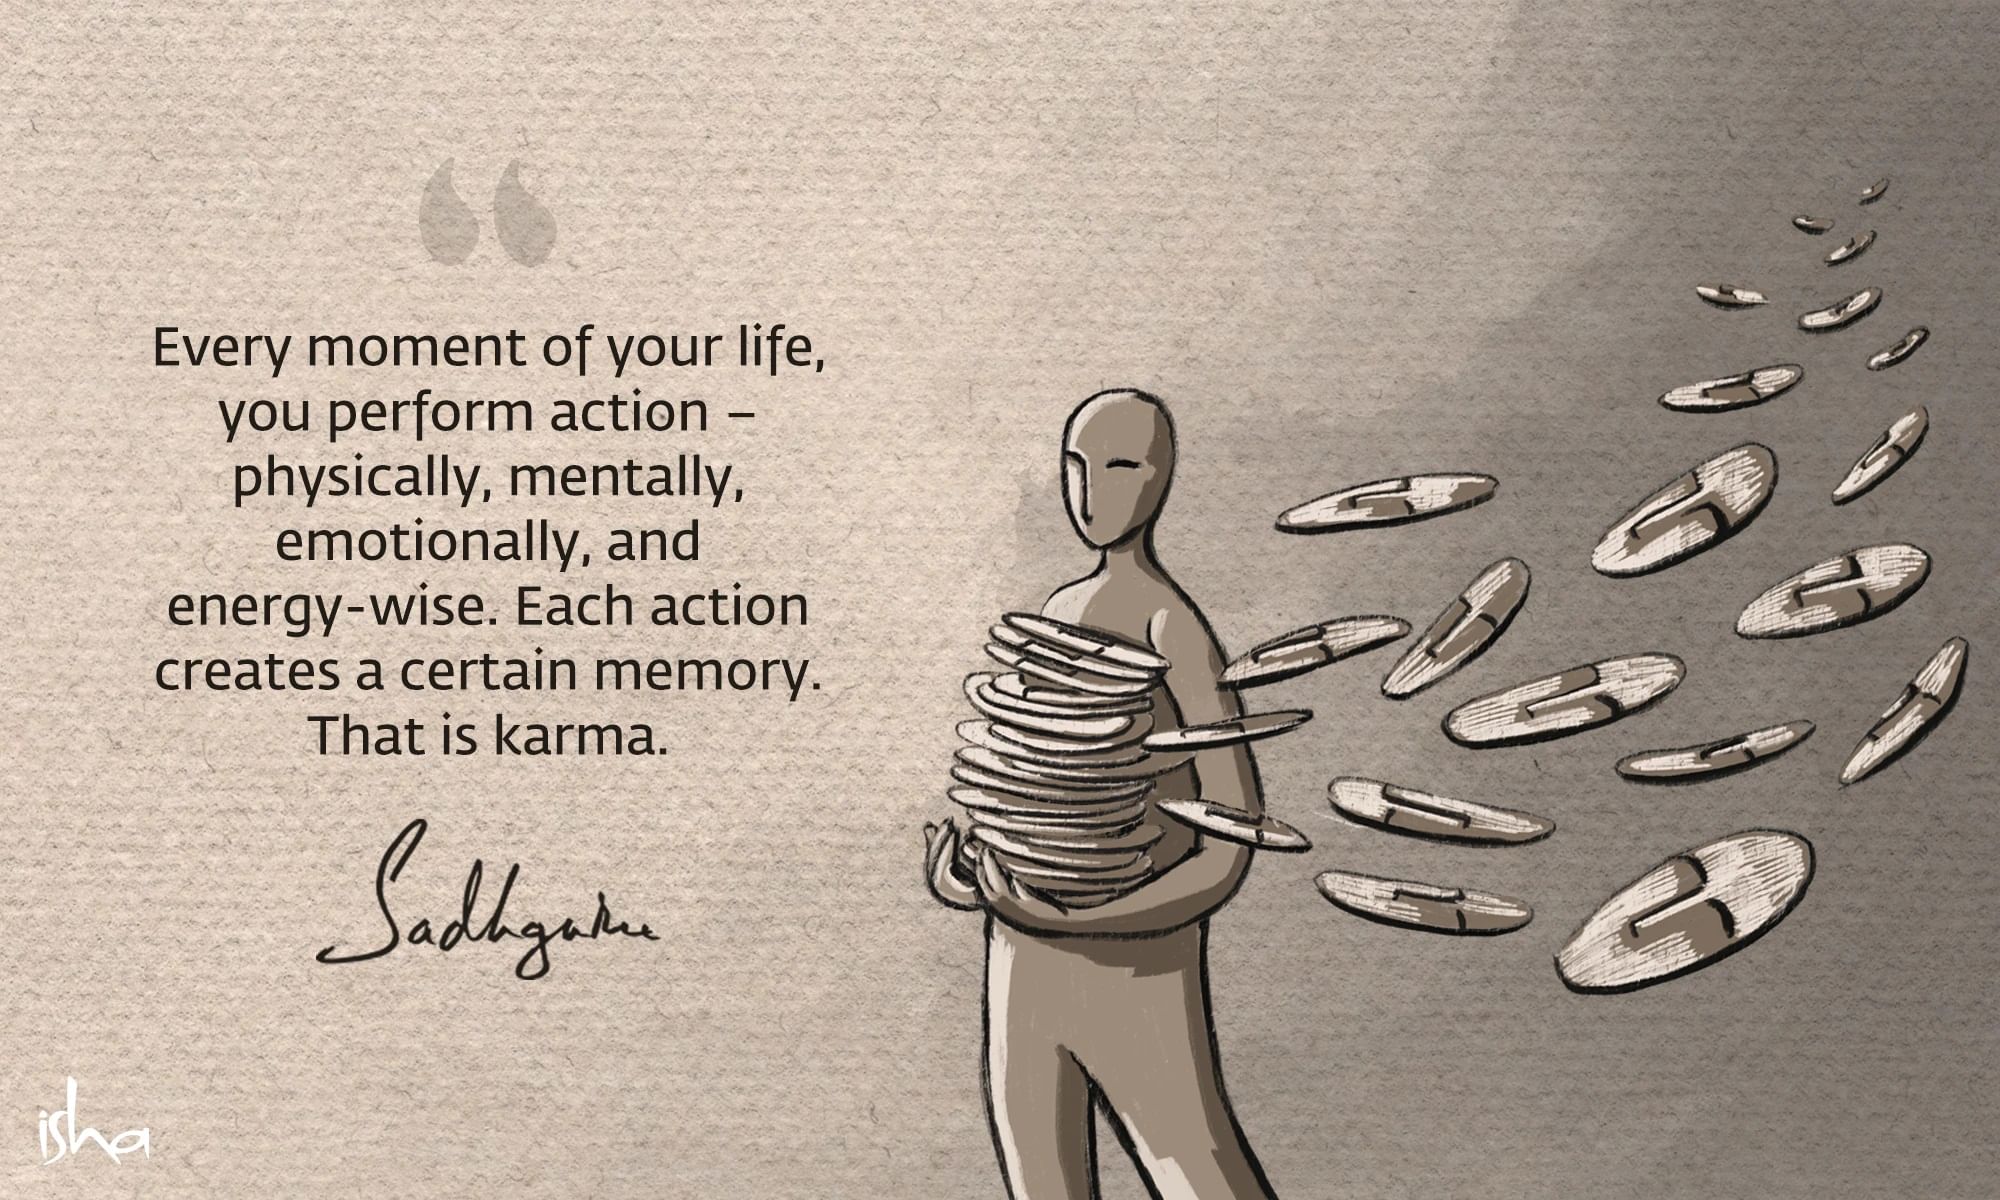 Quote on karma showing figurine carrying a stack of karma and losing some of it while performing action.